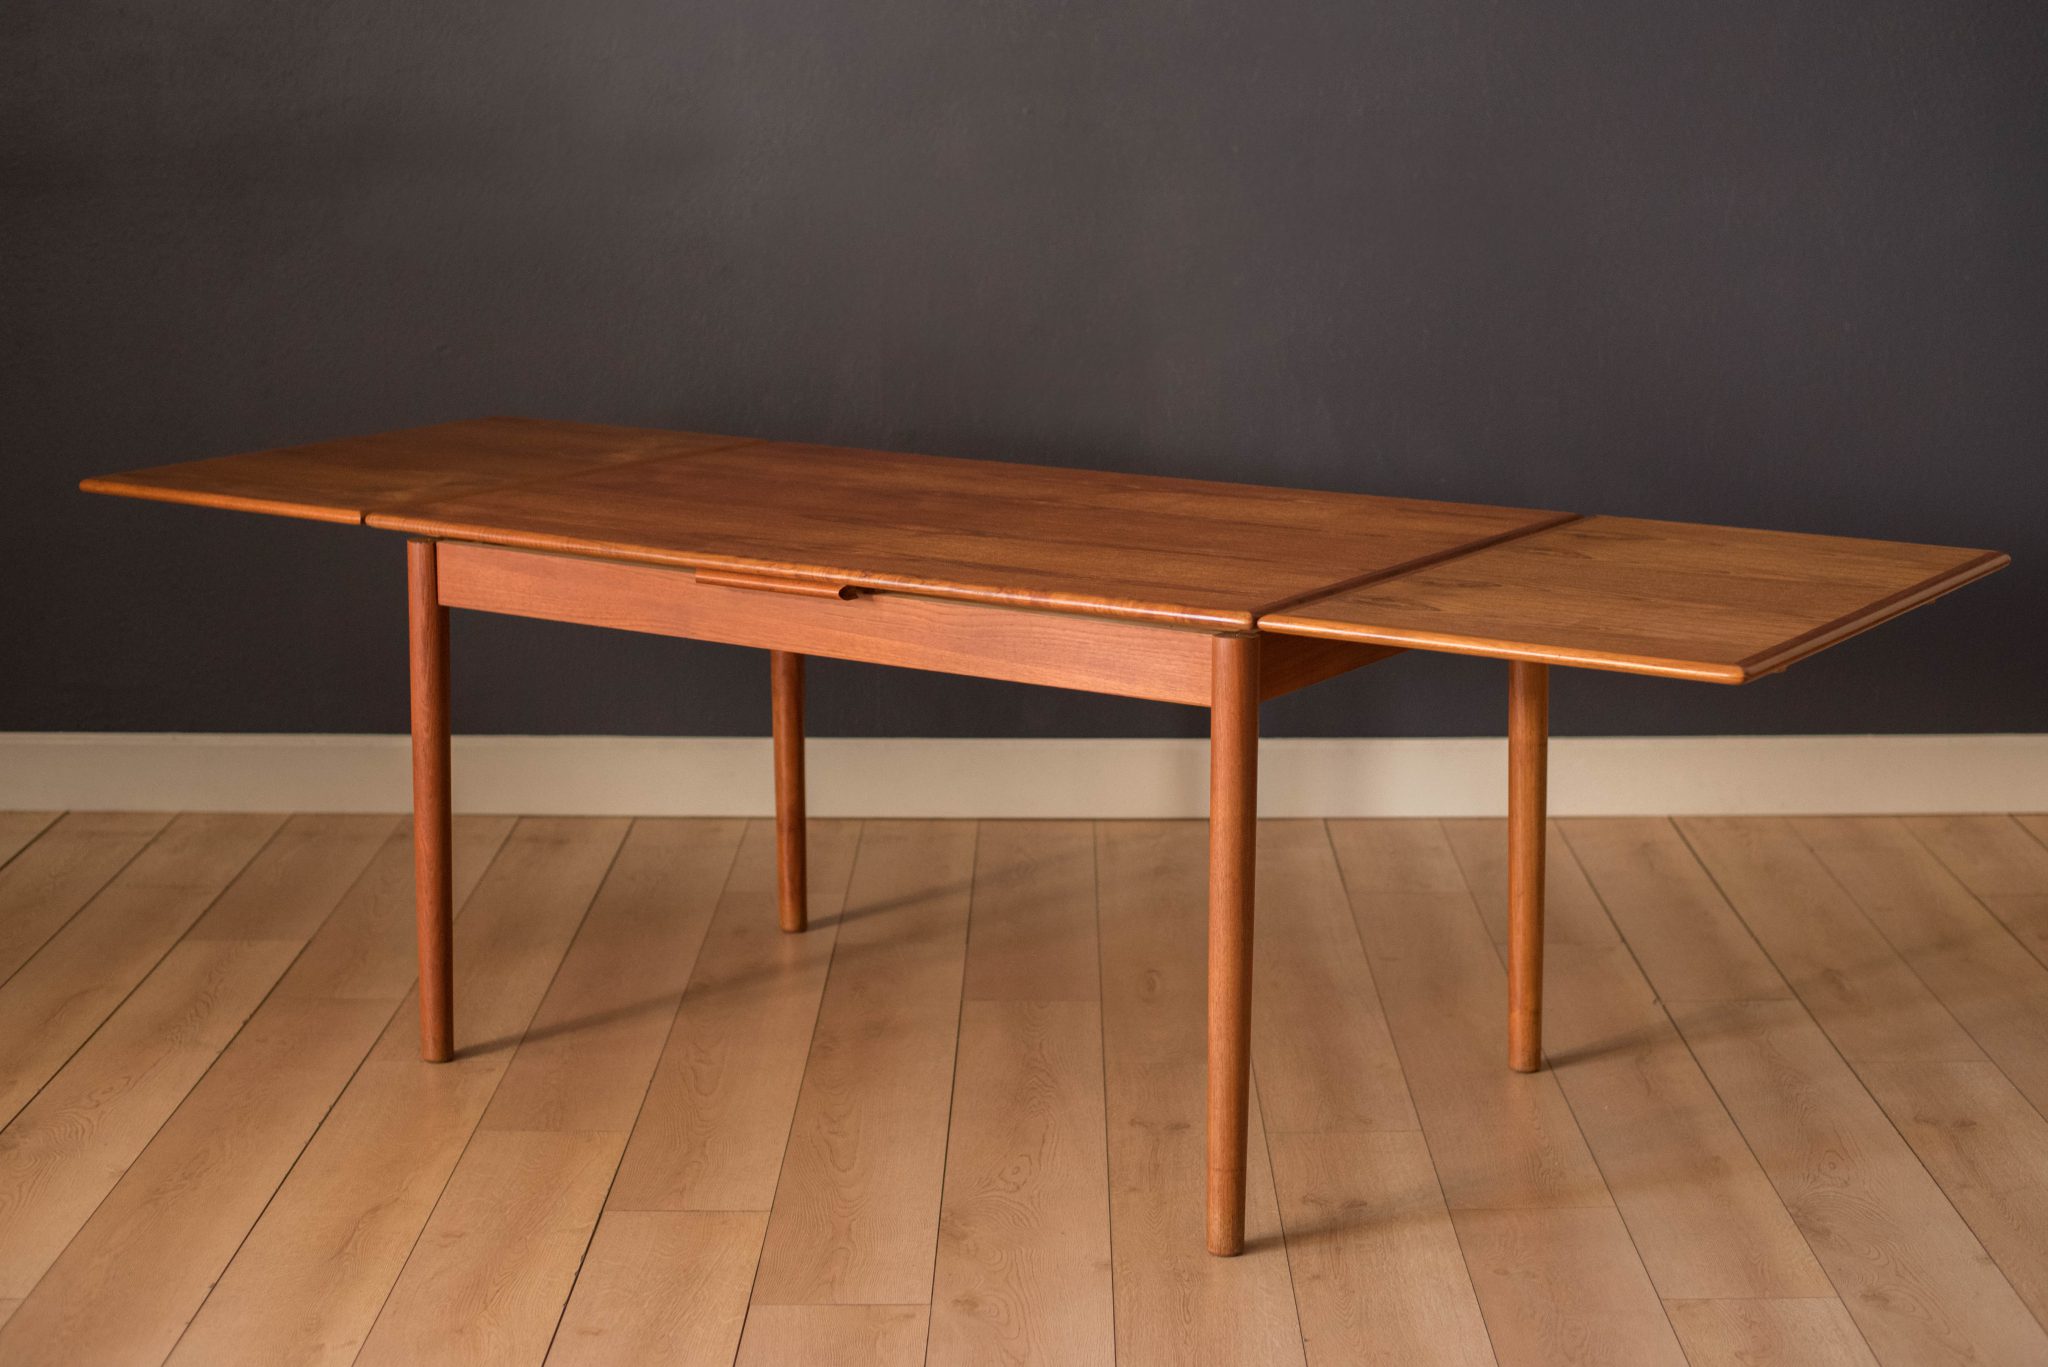 Teak Dining Table With Drawers: Keep Your Dining Essentials Handy